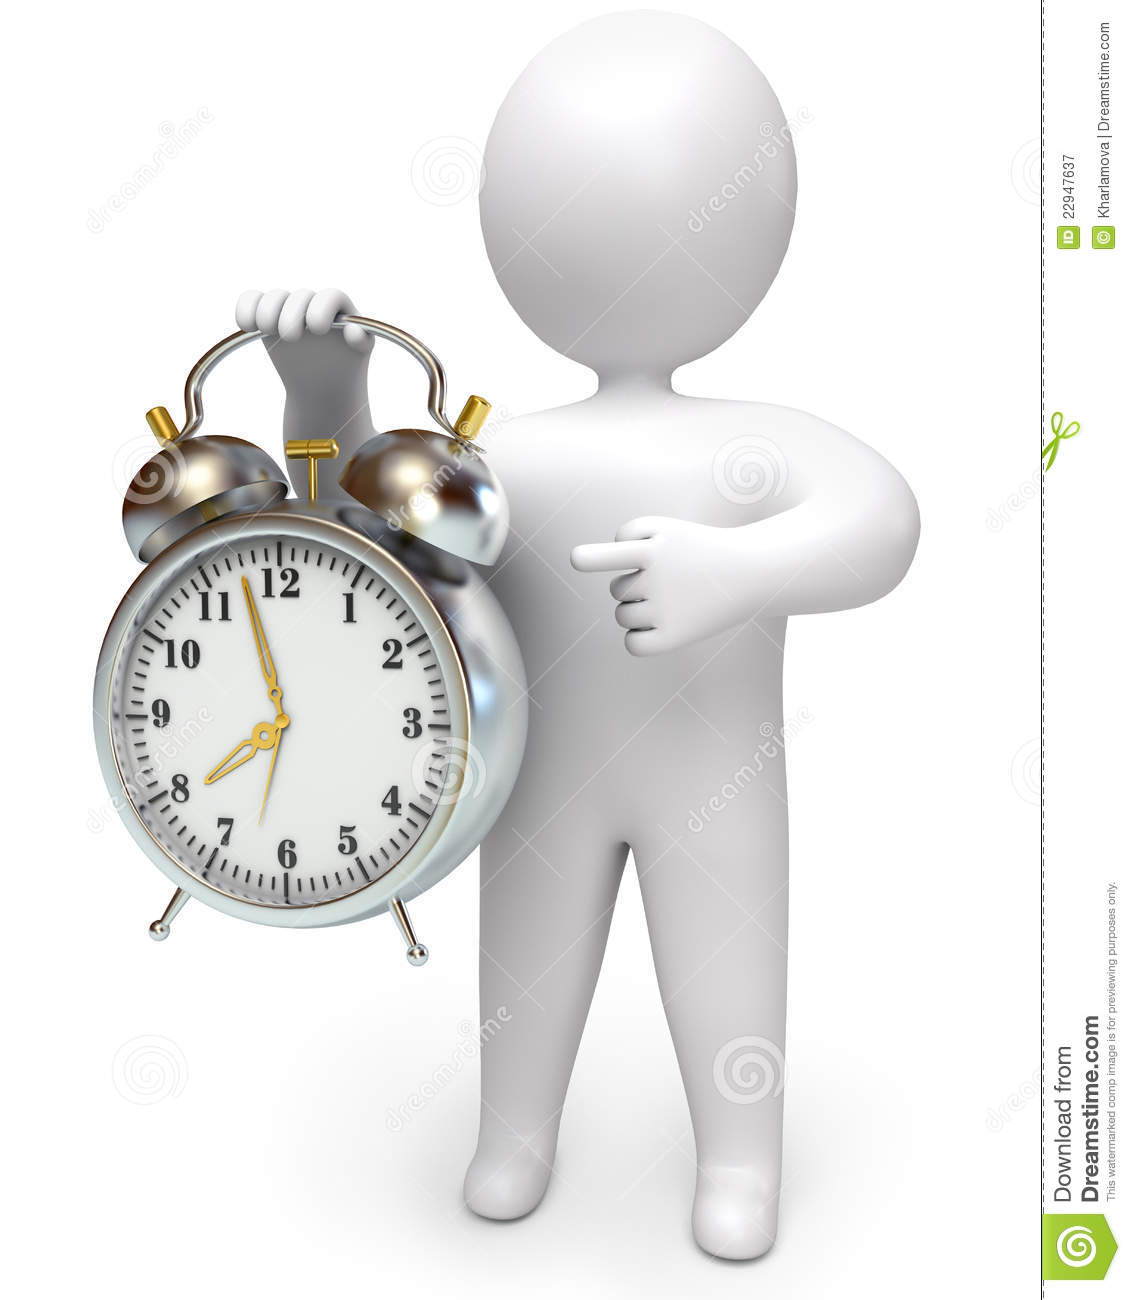 Man Points To The Clock Royalty Free Stock Photography   Image